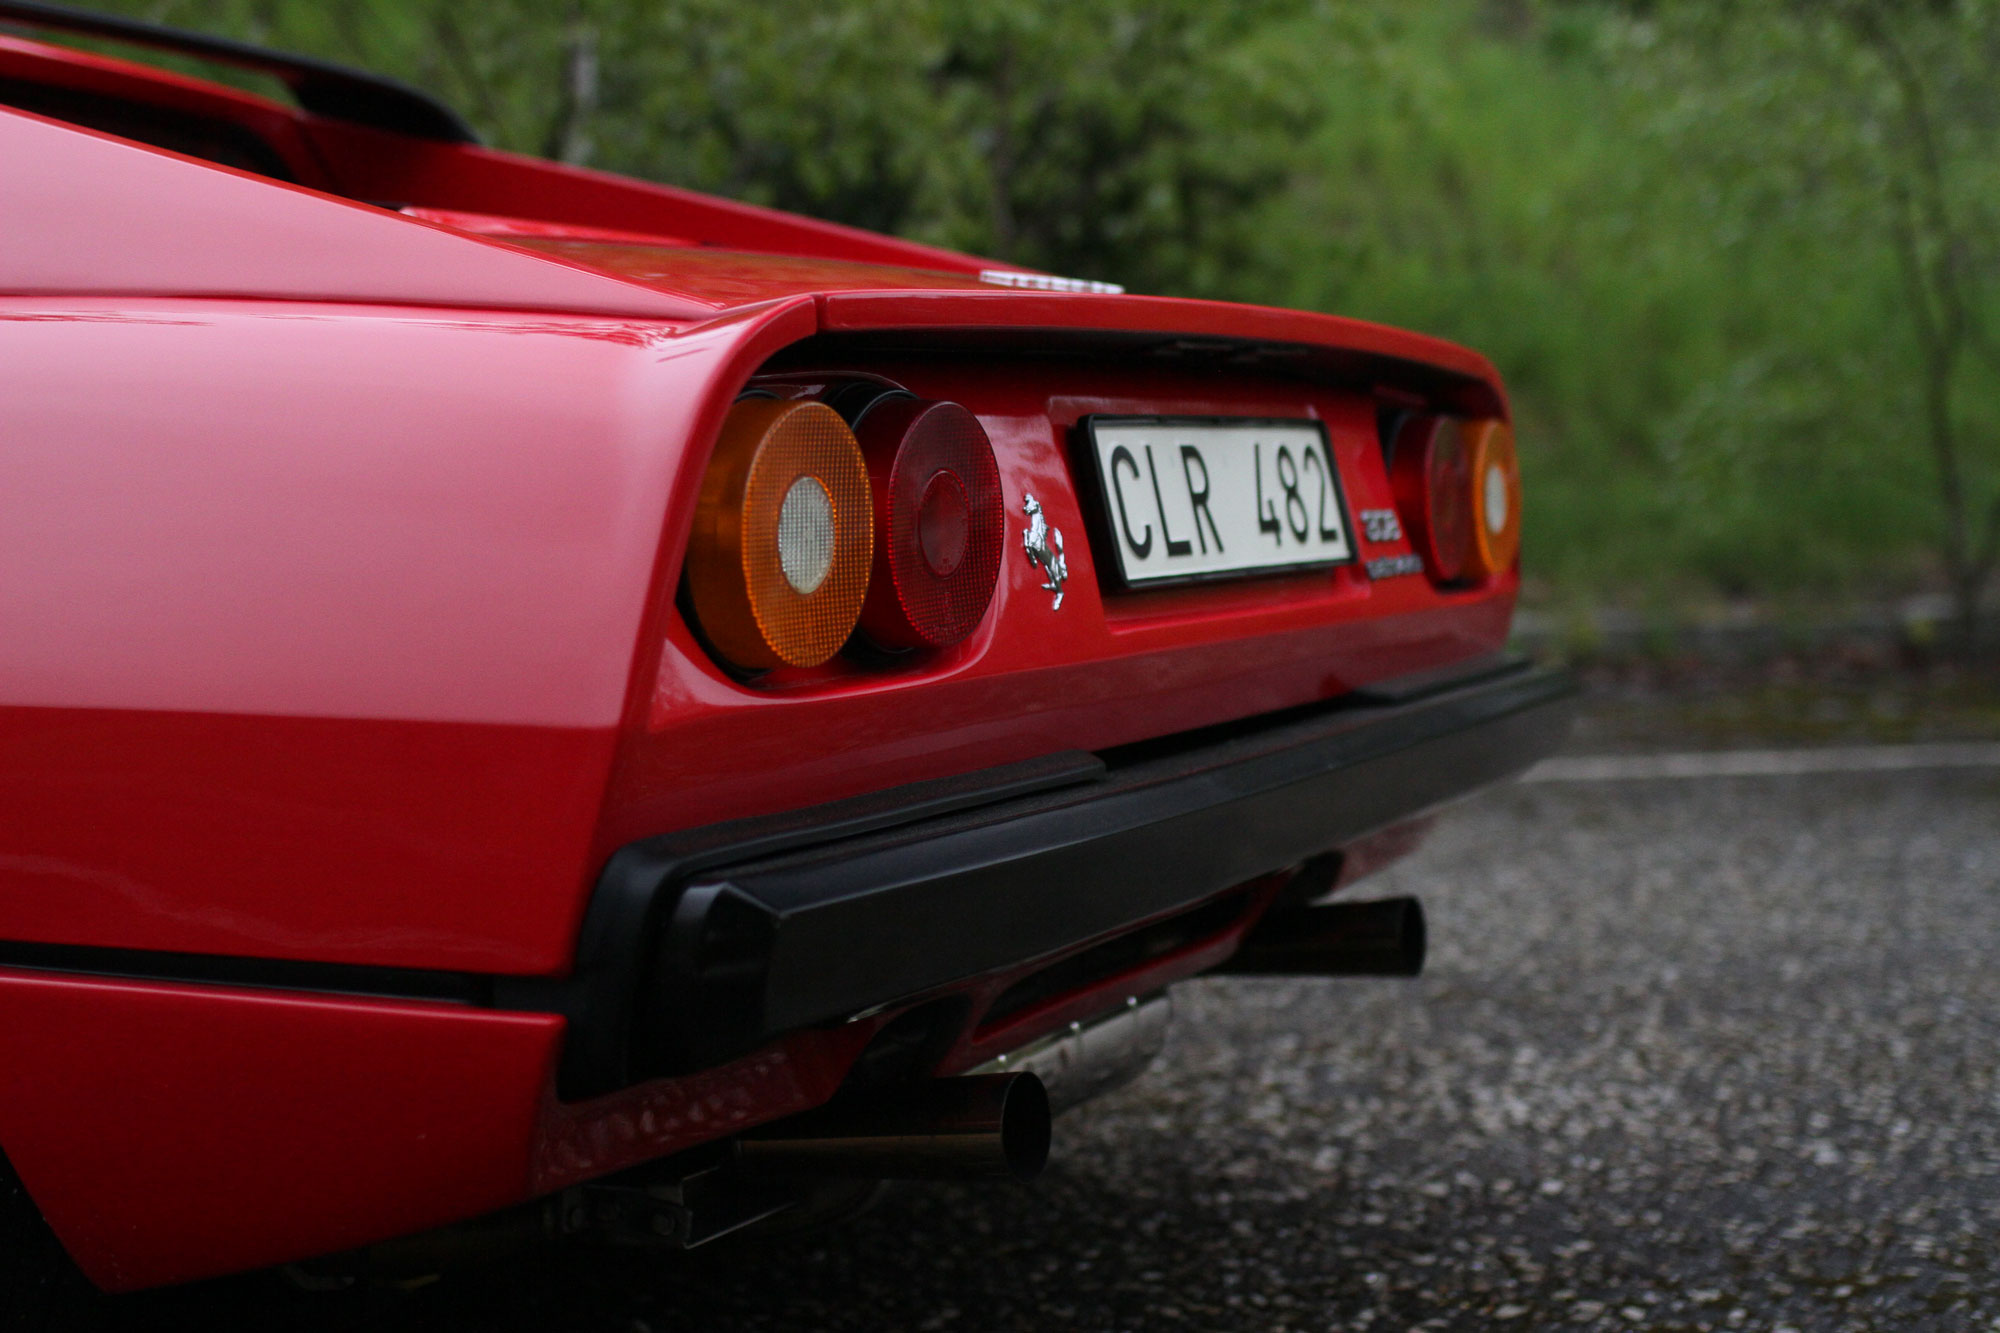 The behind with the classic round tail lights. Ferrari 308 GTB QV - 1984